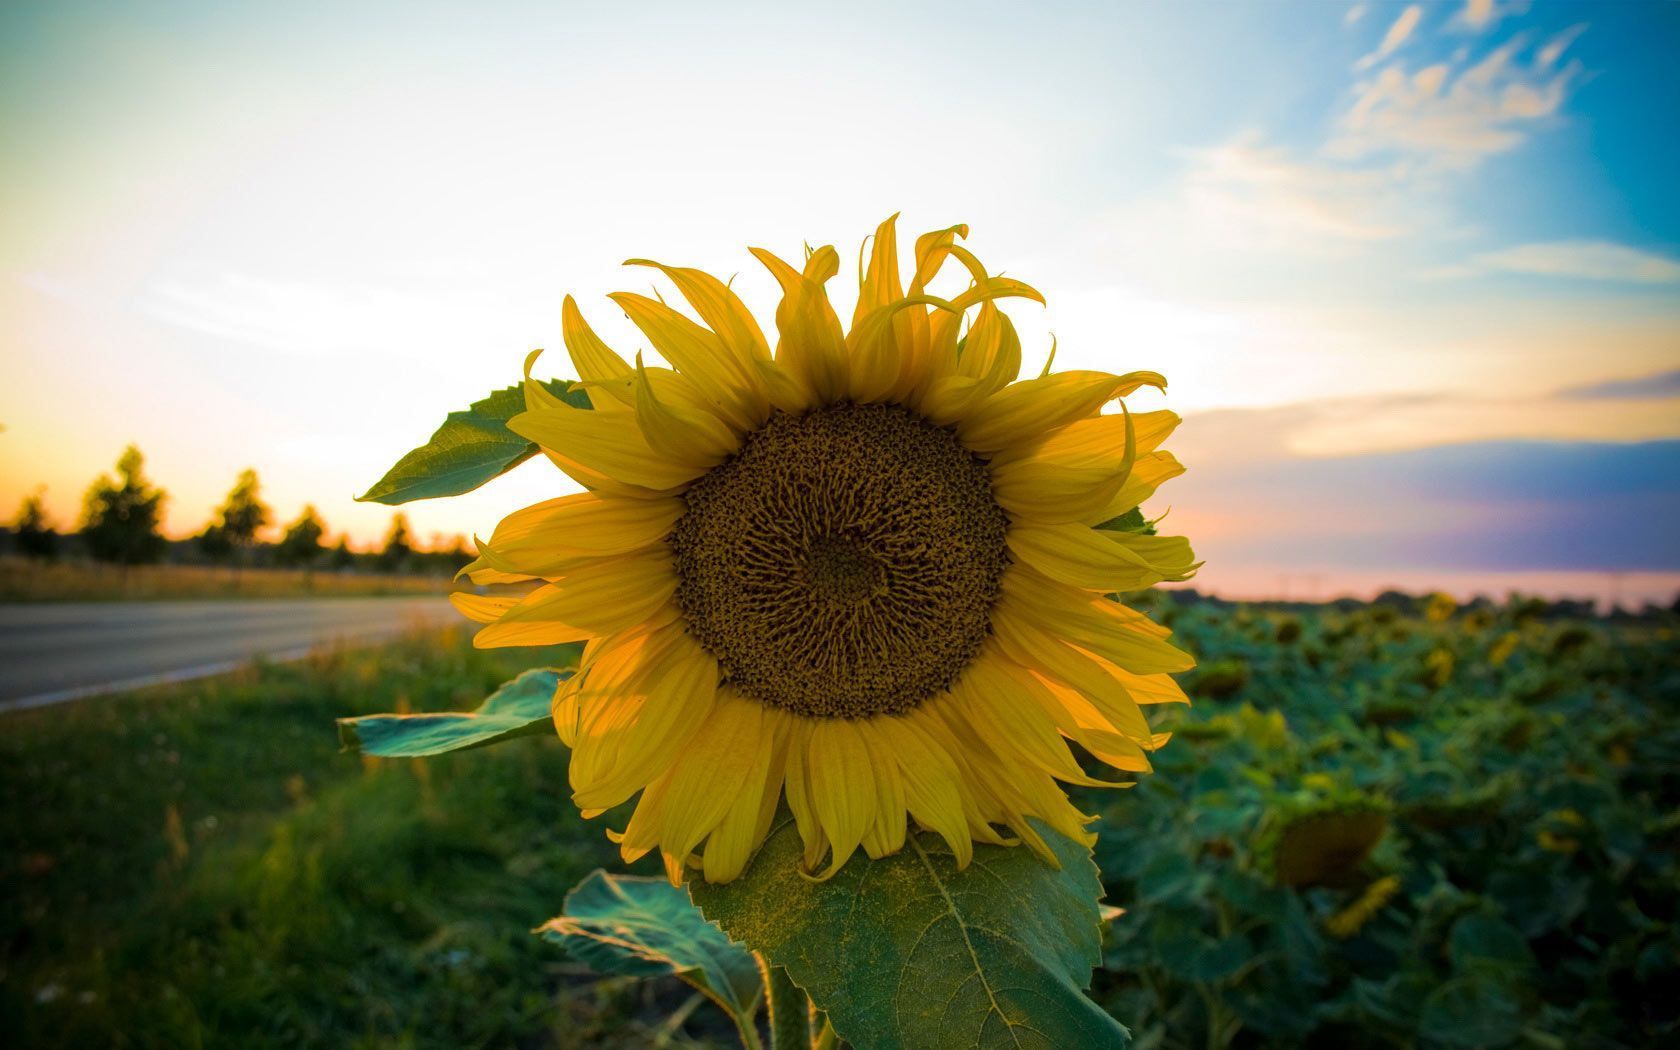 Cool Sunflower Background Screen HD Wallpapers HD Wallapers for Free